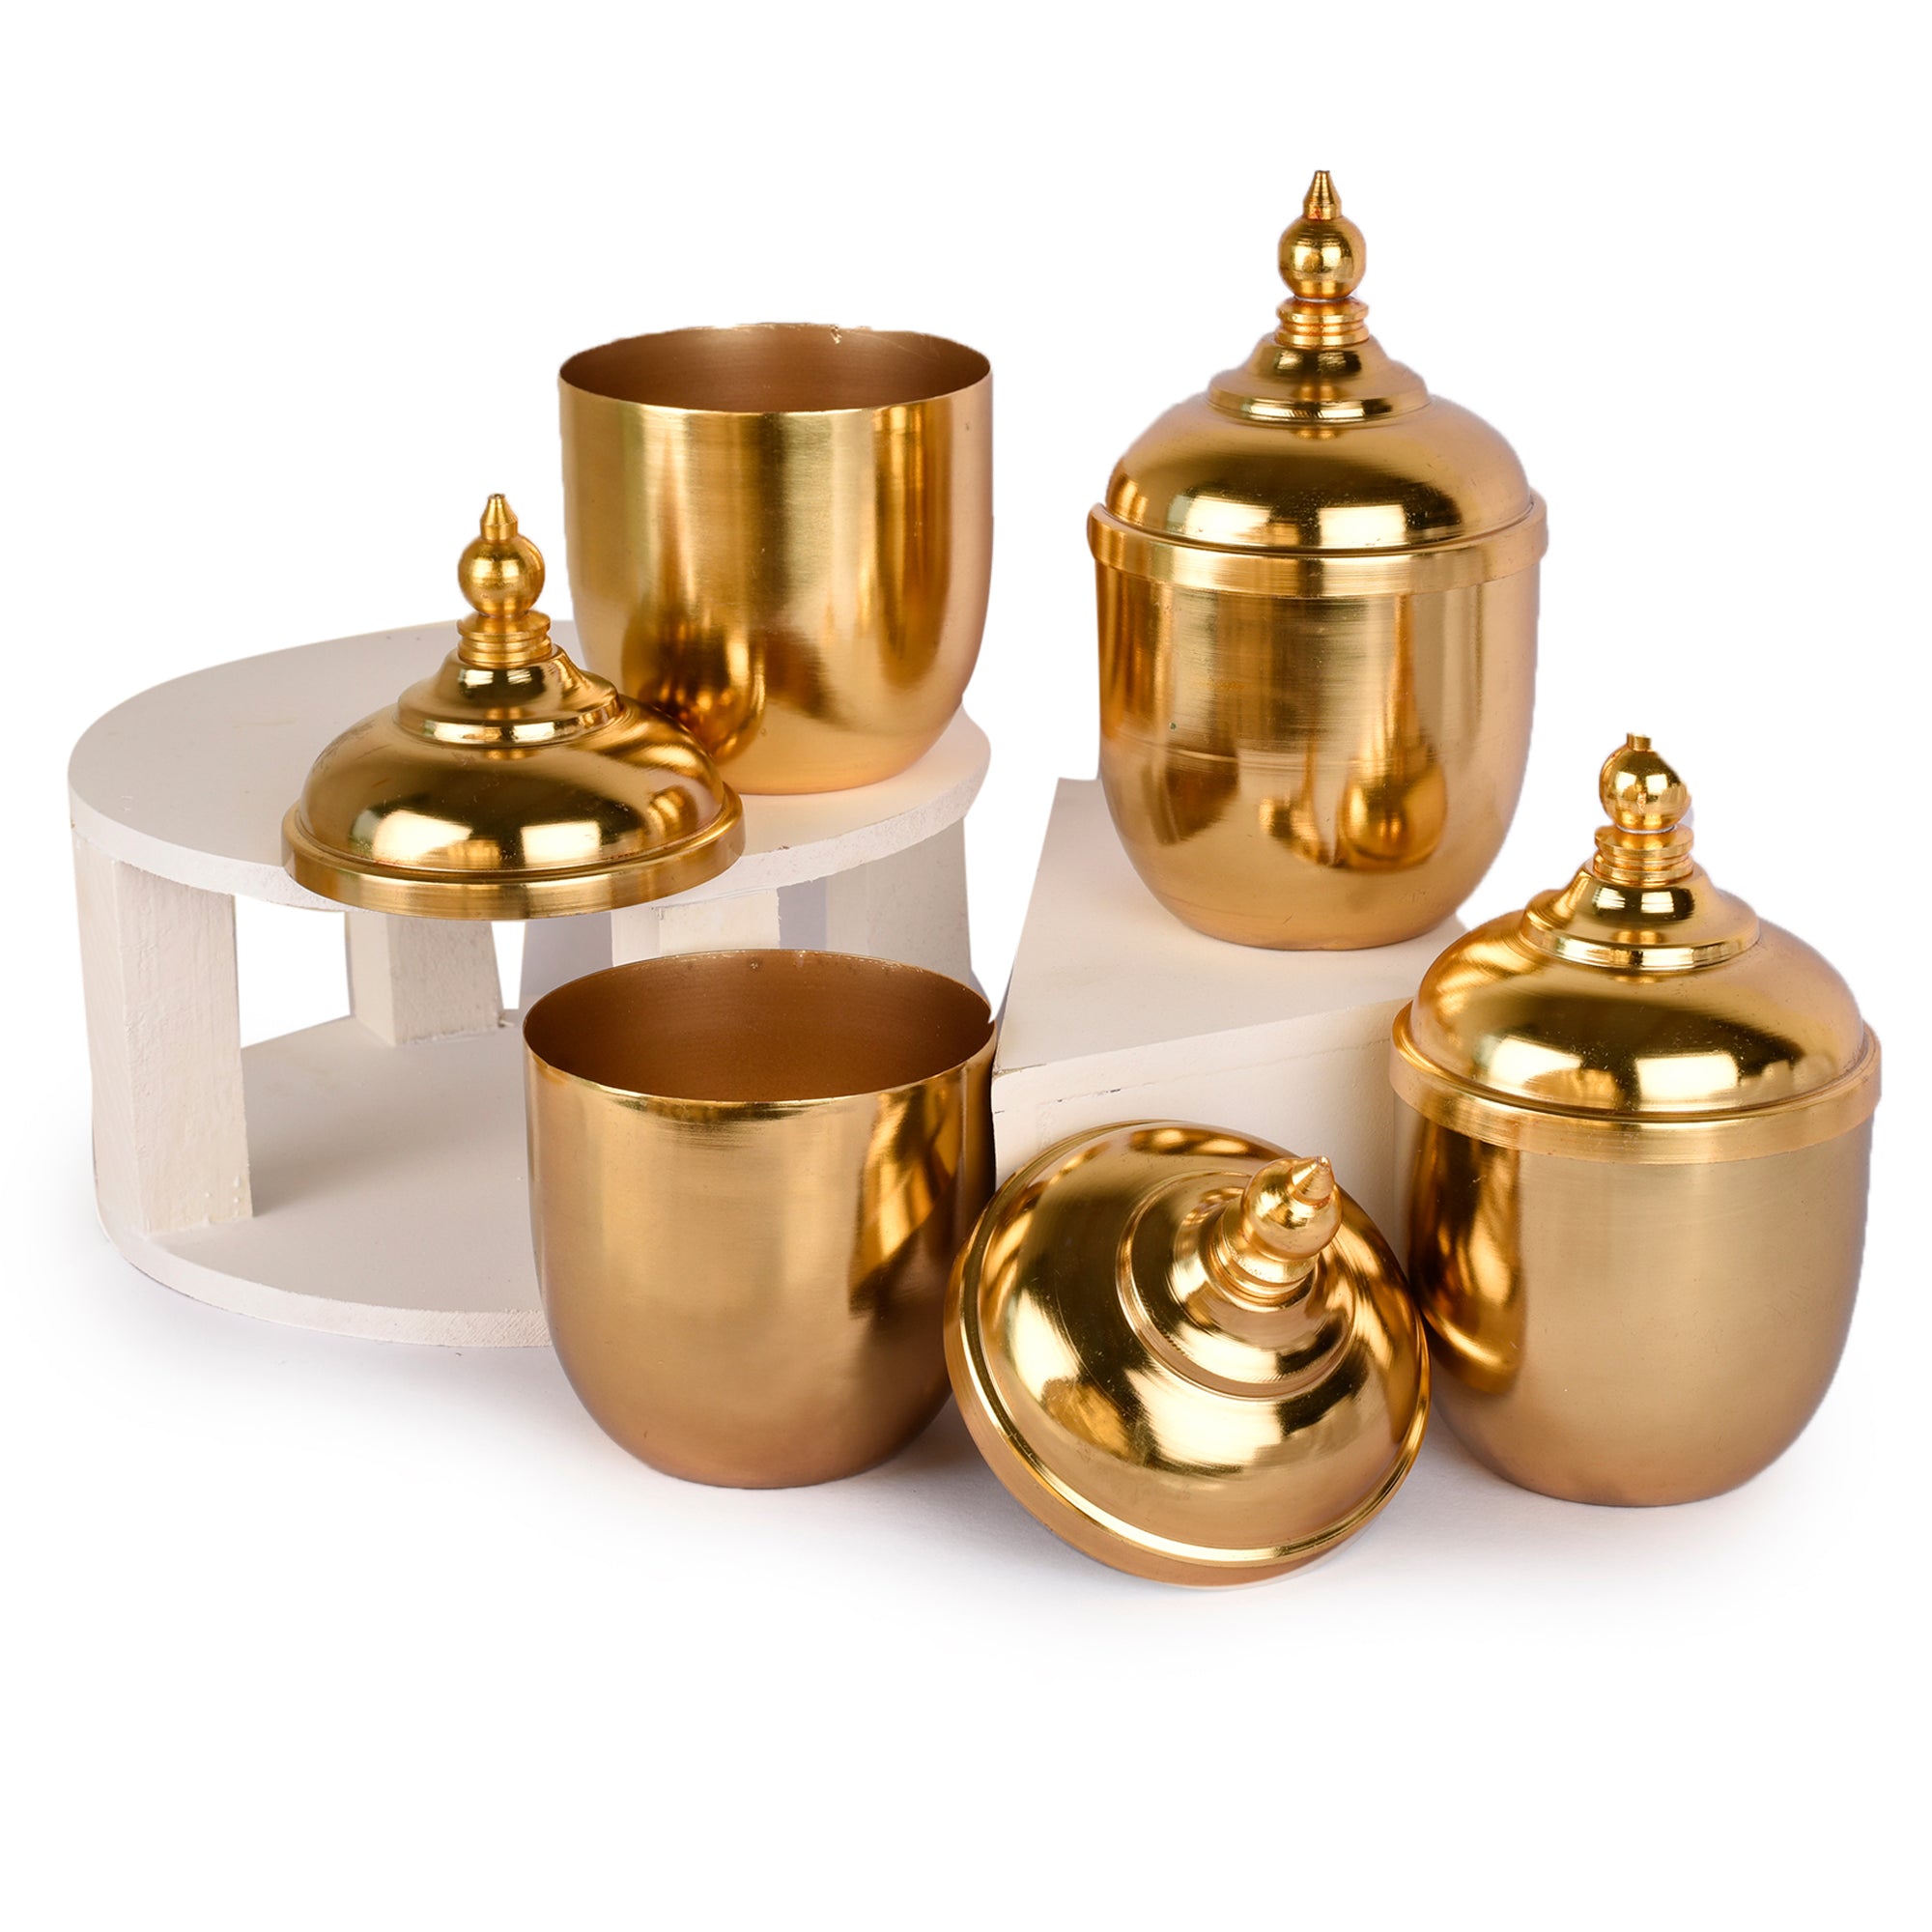 Ortis Tray With 4 Jars Gold Finish